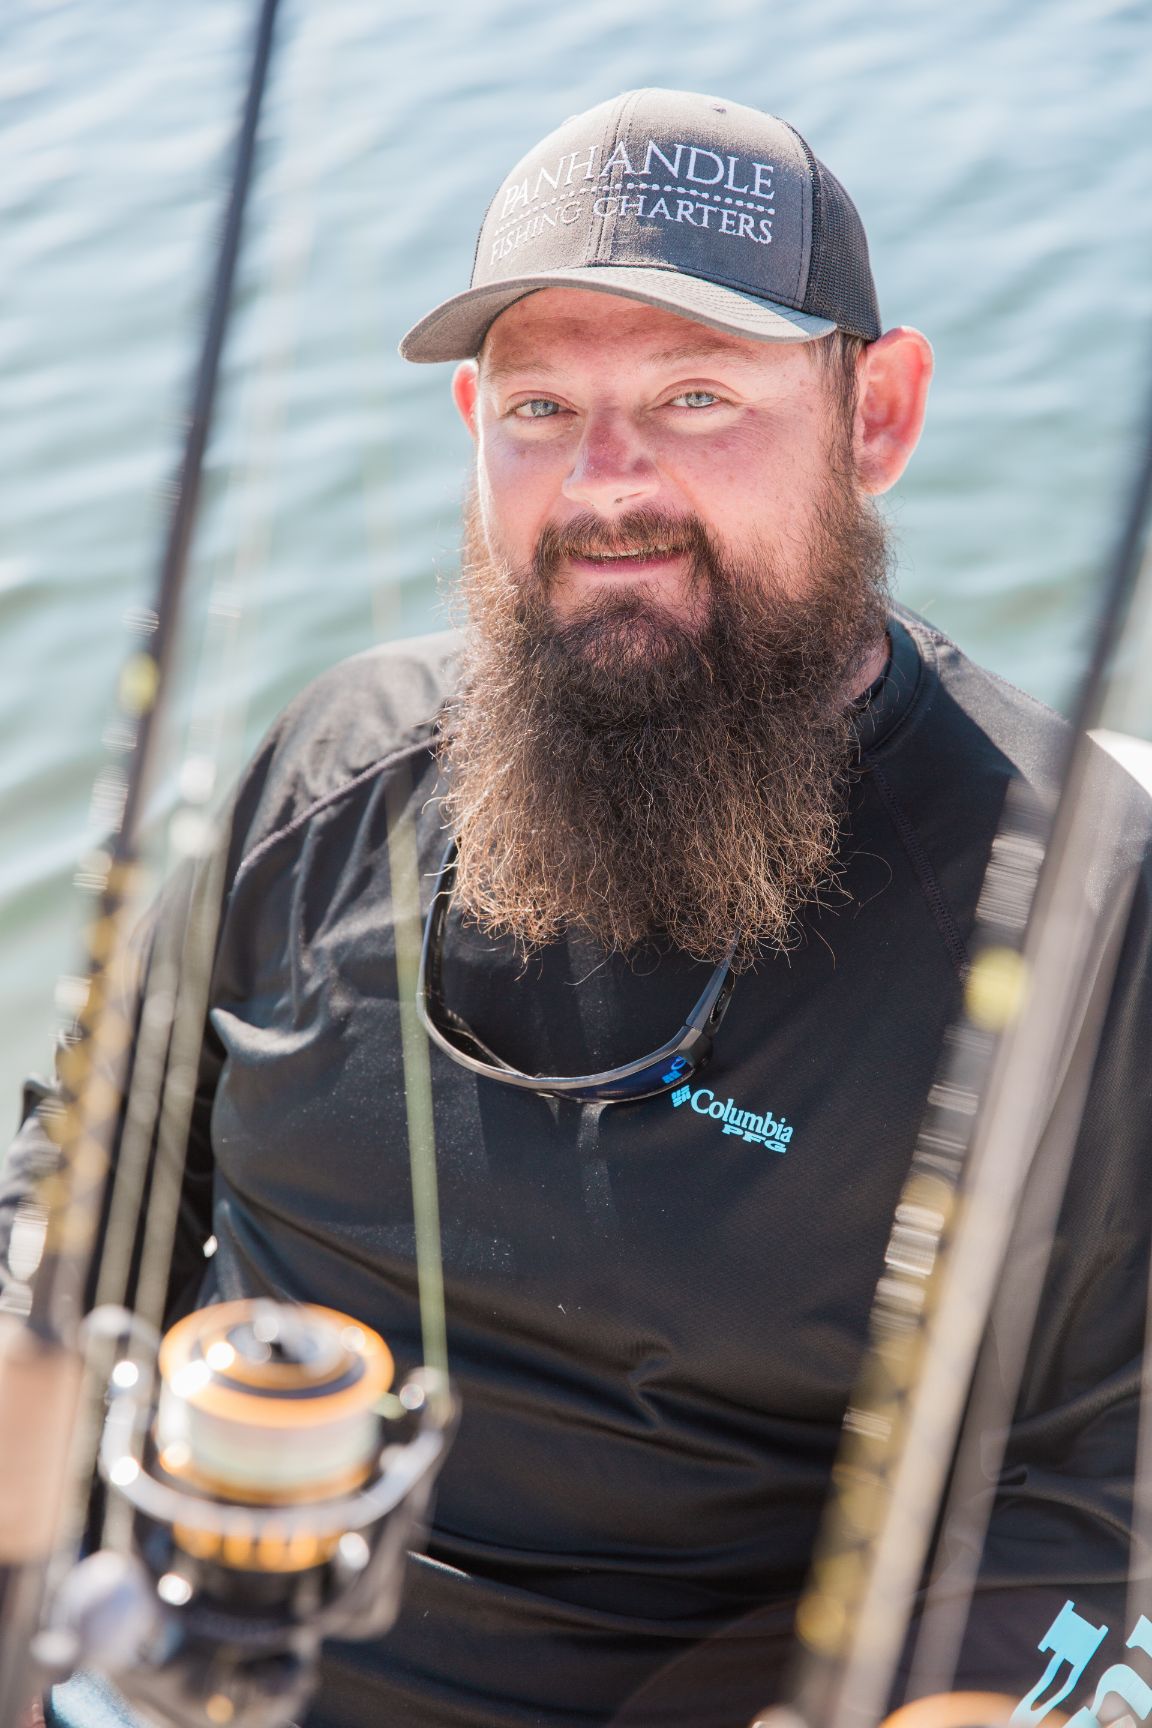 Captain Taylor with Panhandle Fishing Charters takes time to pose while scouting for prime fishing locations.